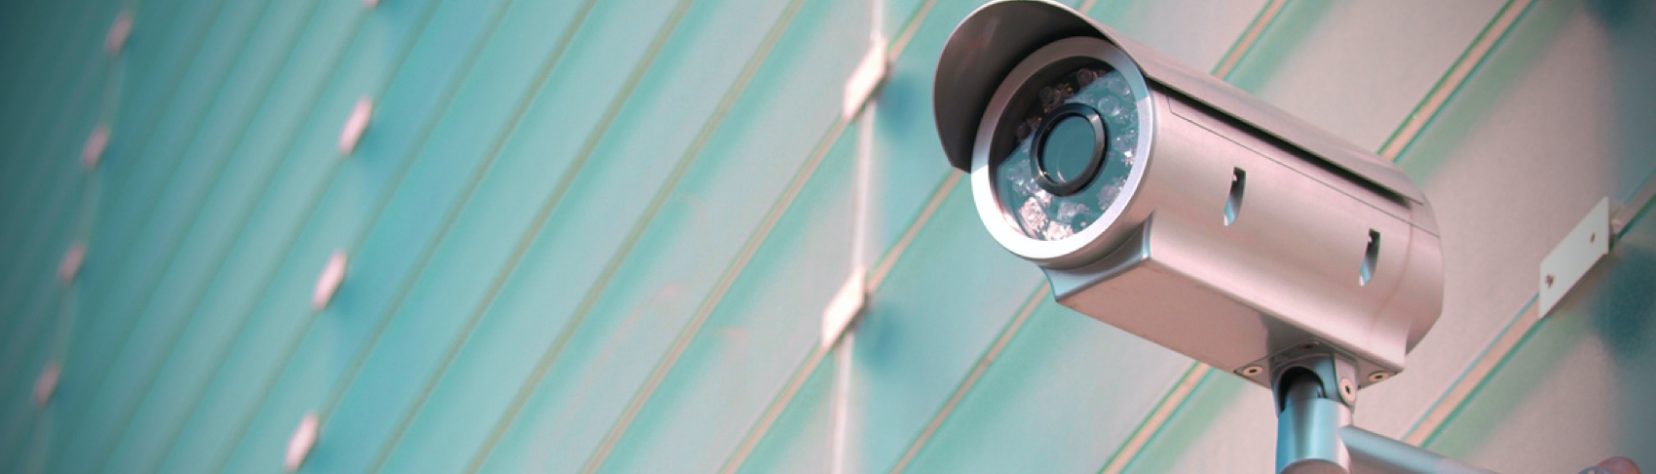 security camera mounted to a wall